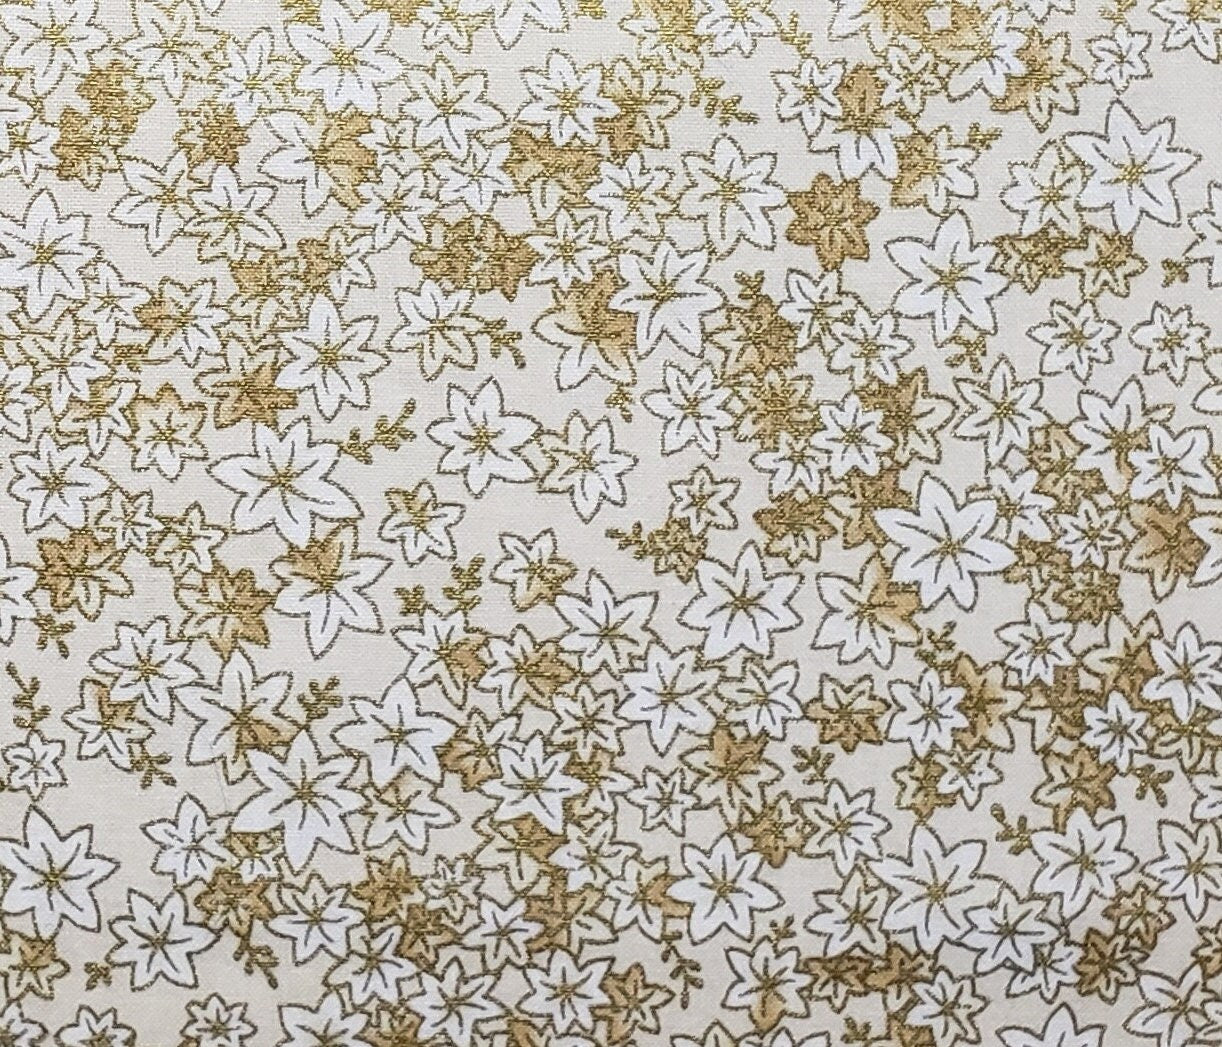 Gold & Black Glitter Quilt Cotton Fabric by Keepsake Calico